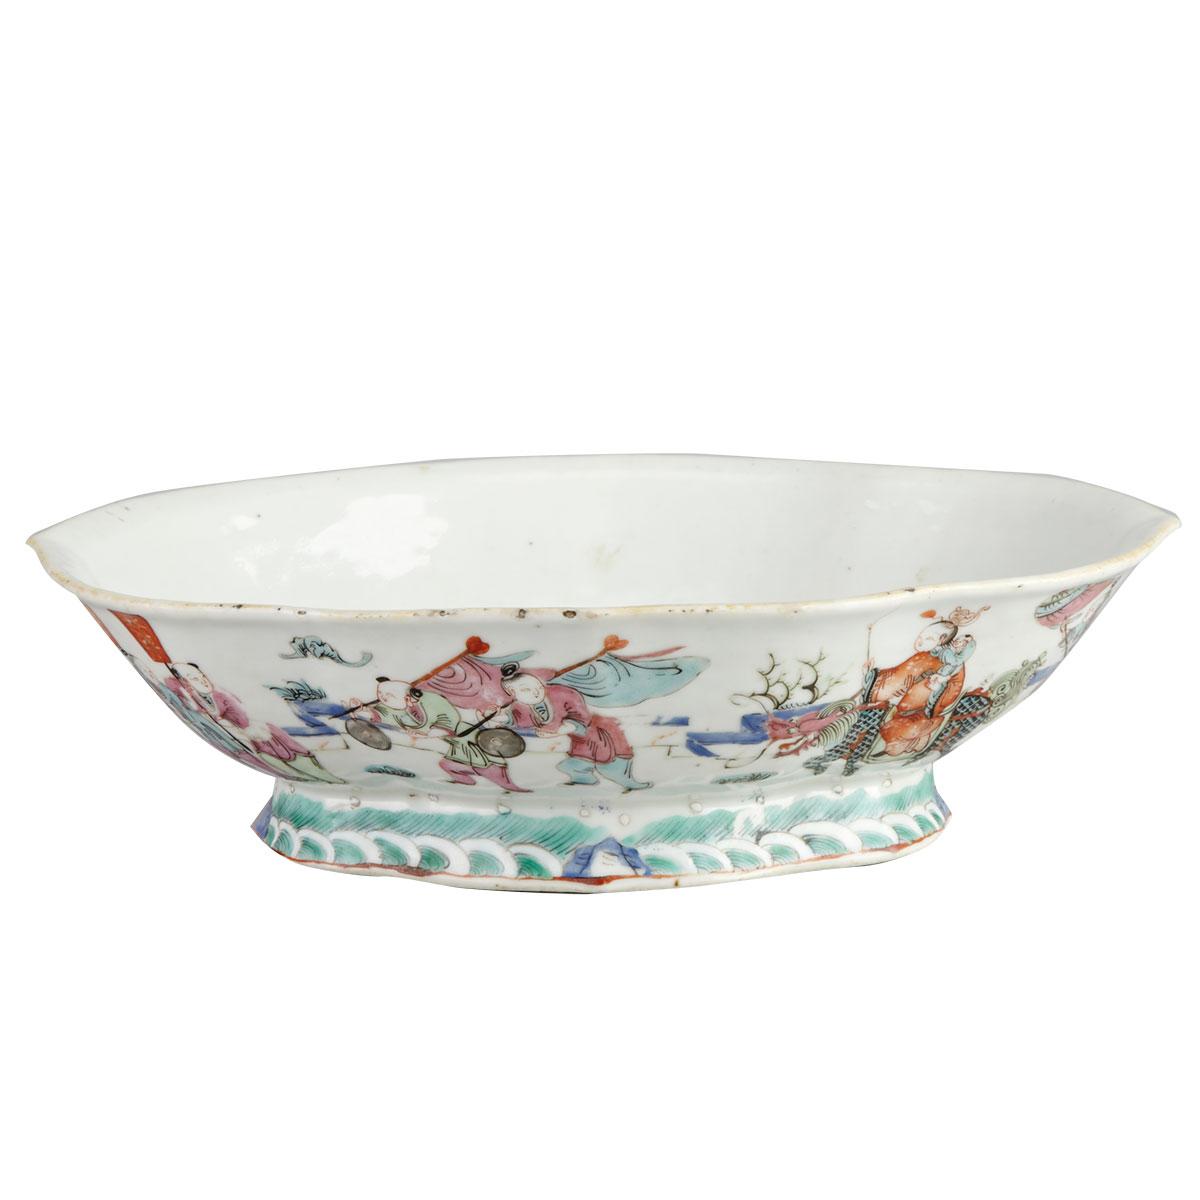 Famille Rose Footed Bowl, Qianlong Mark, Late Qing Dynasty